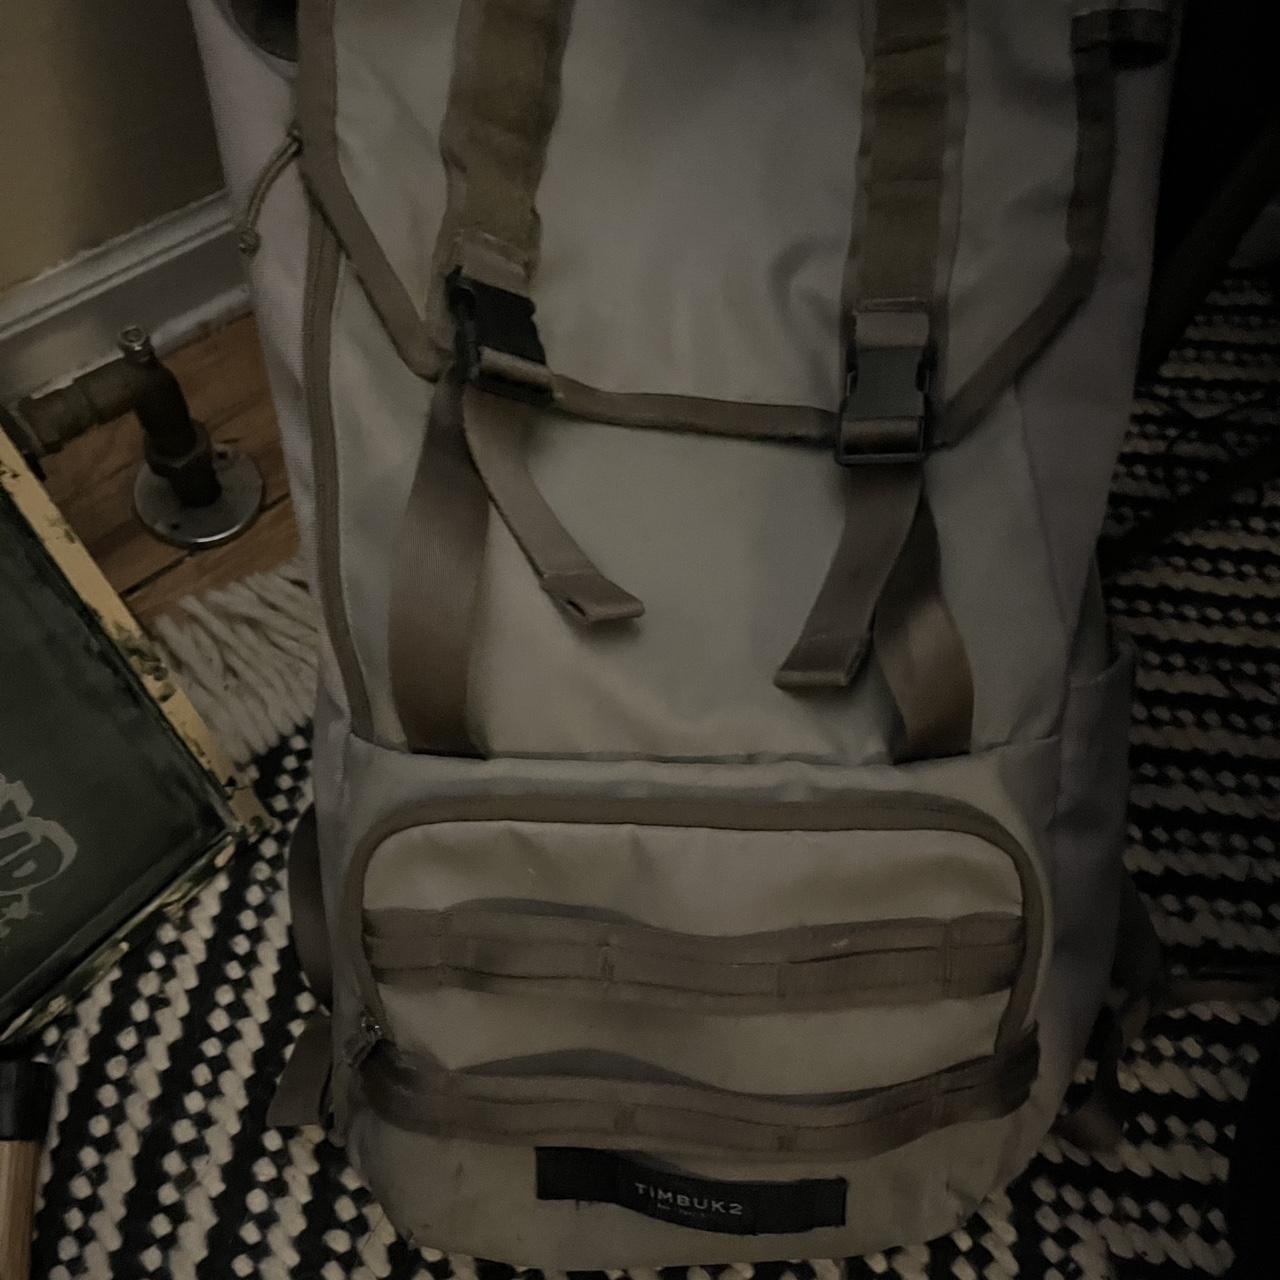 Timbuk2 rogue 2.0 backpack 21 liters with a nice - Depop